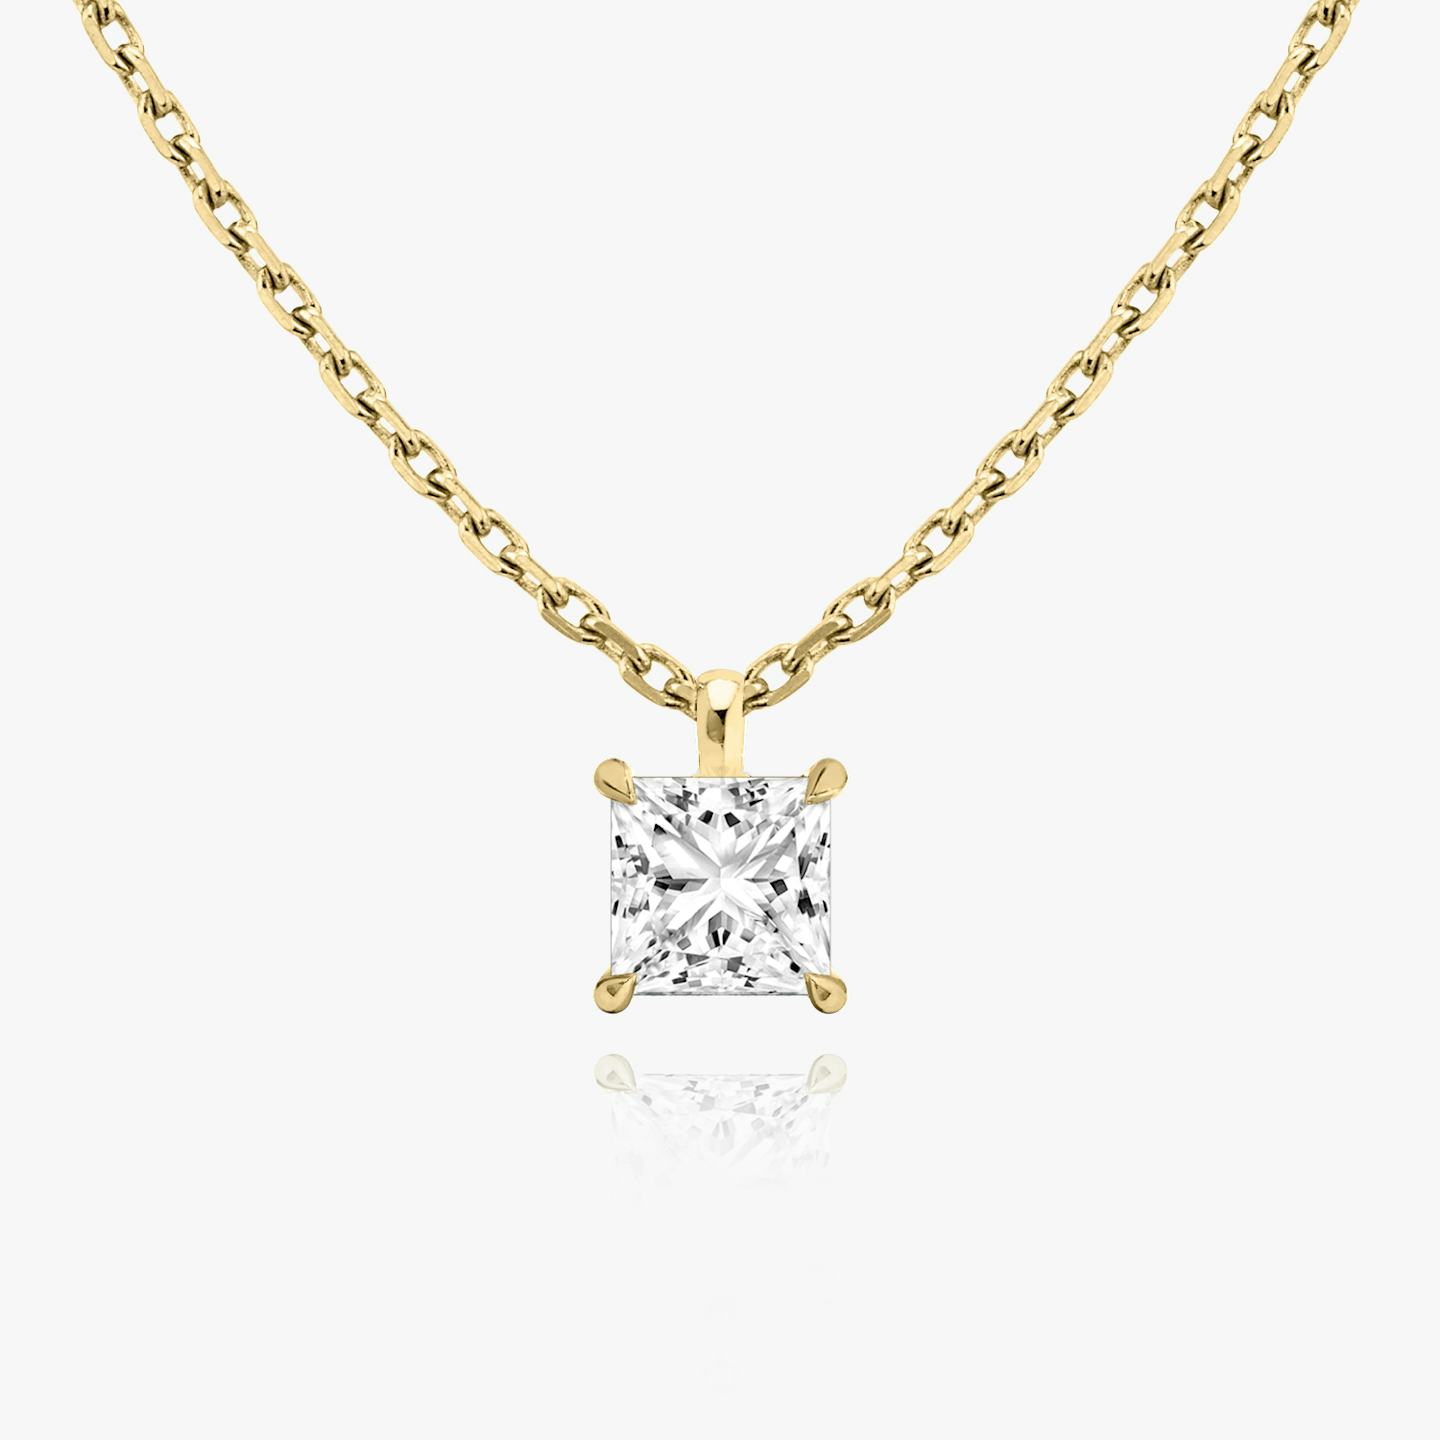 Princess cut diamond pendant in yellow gold front view